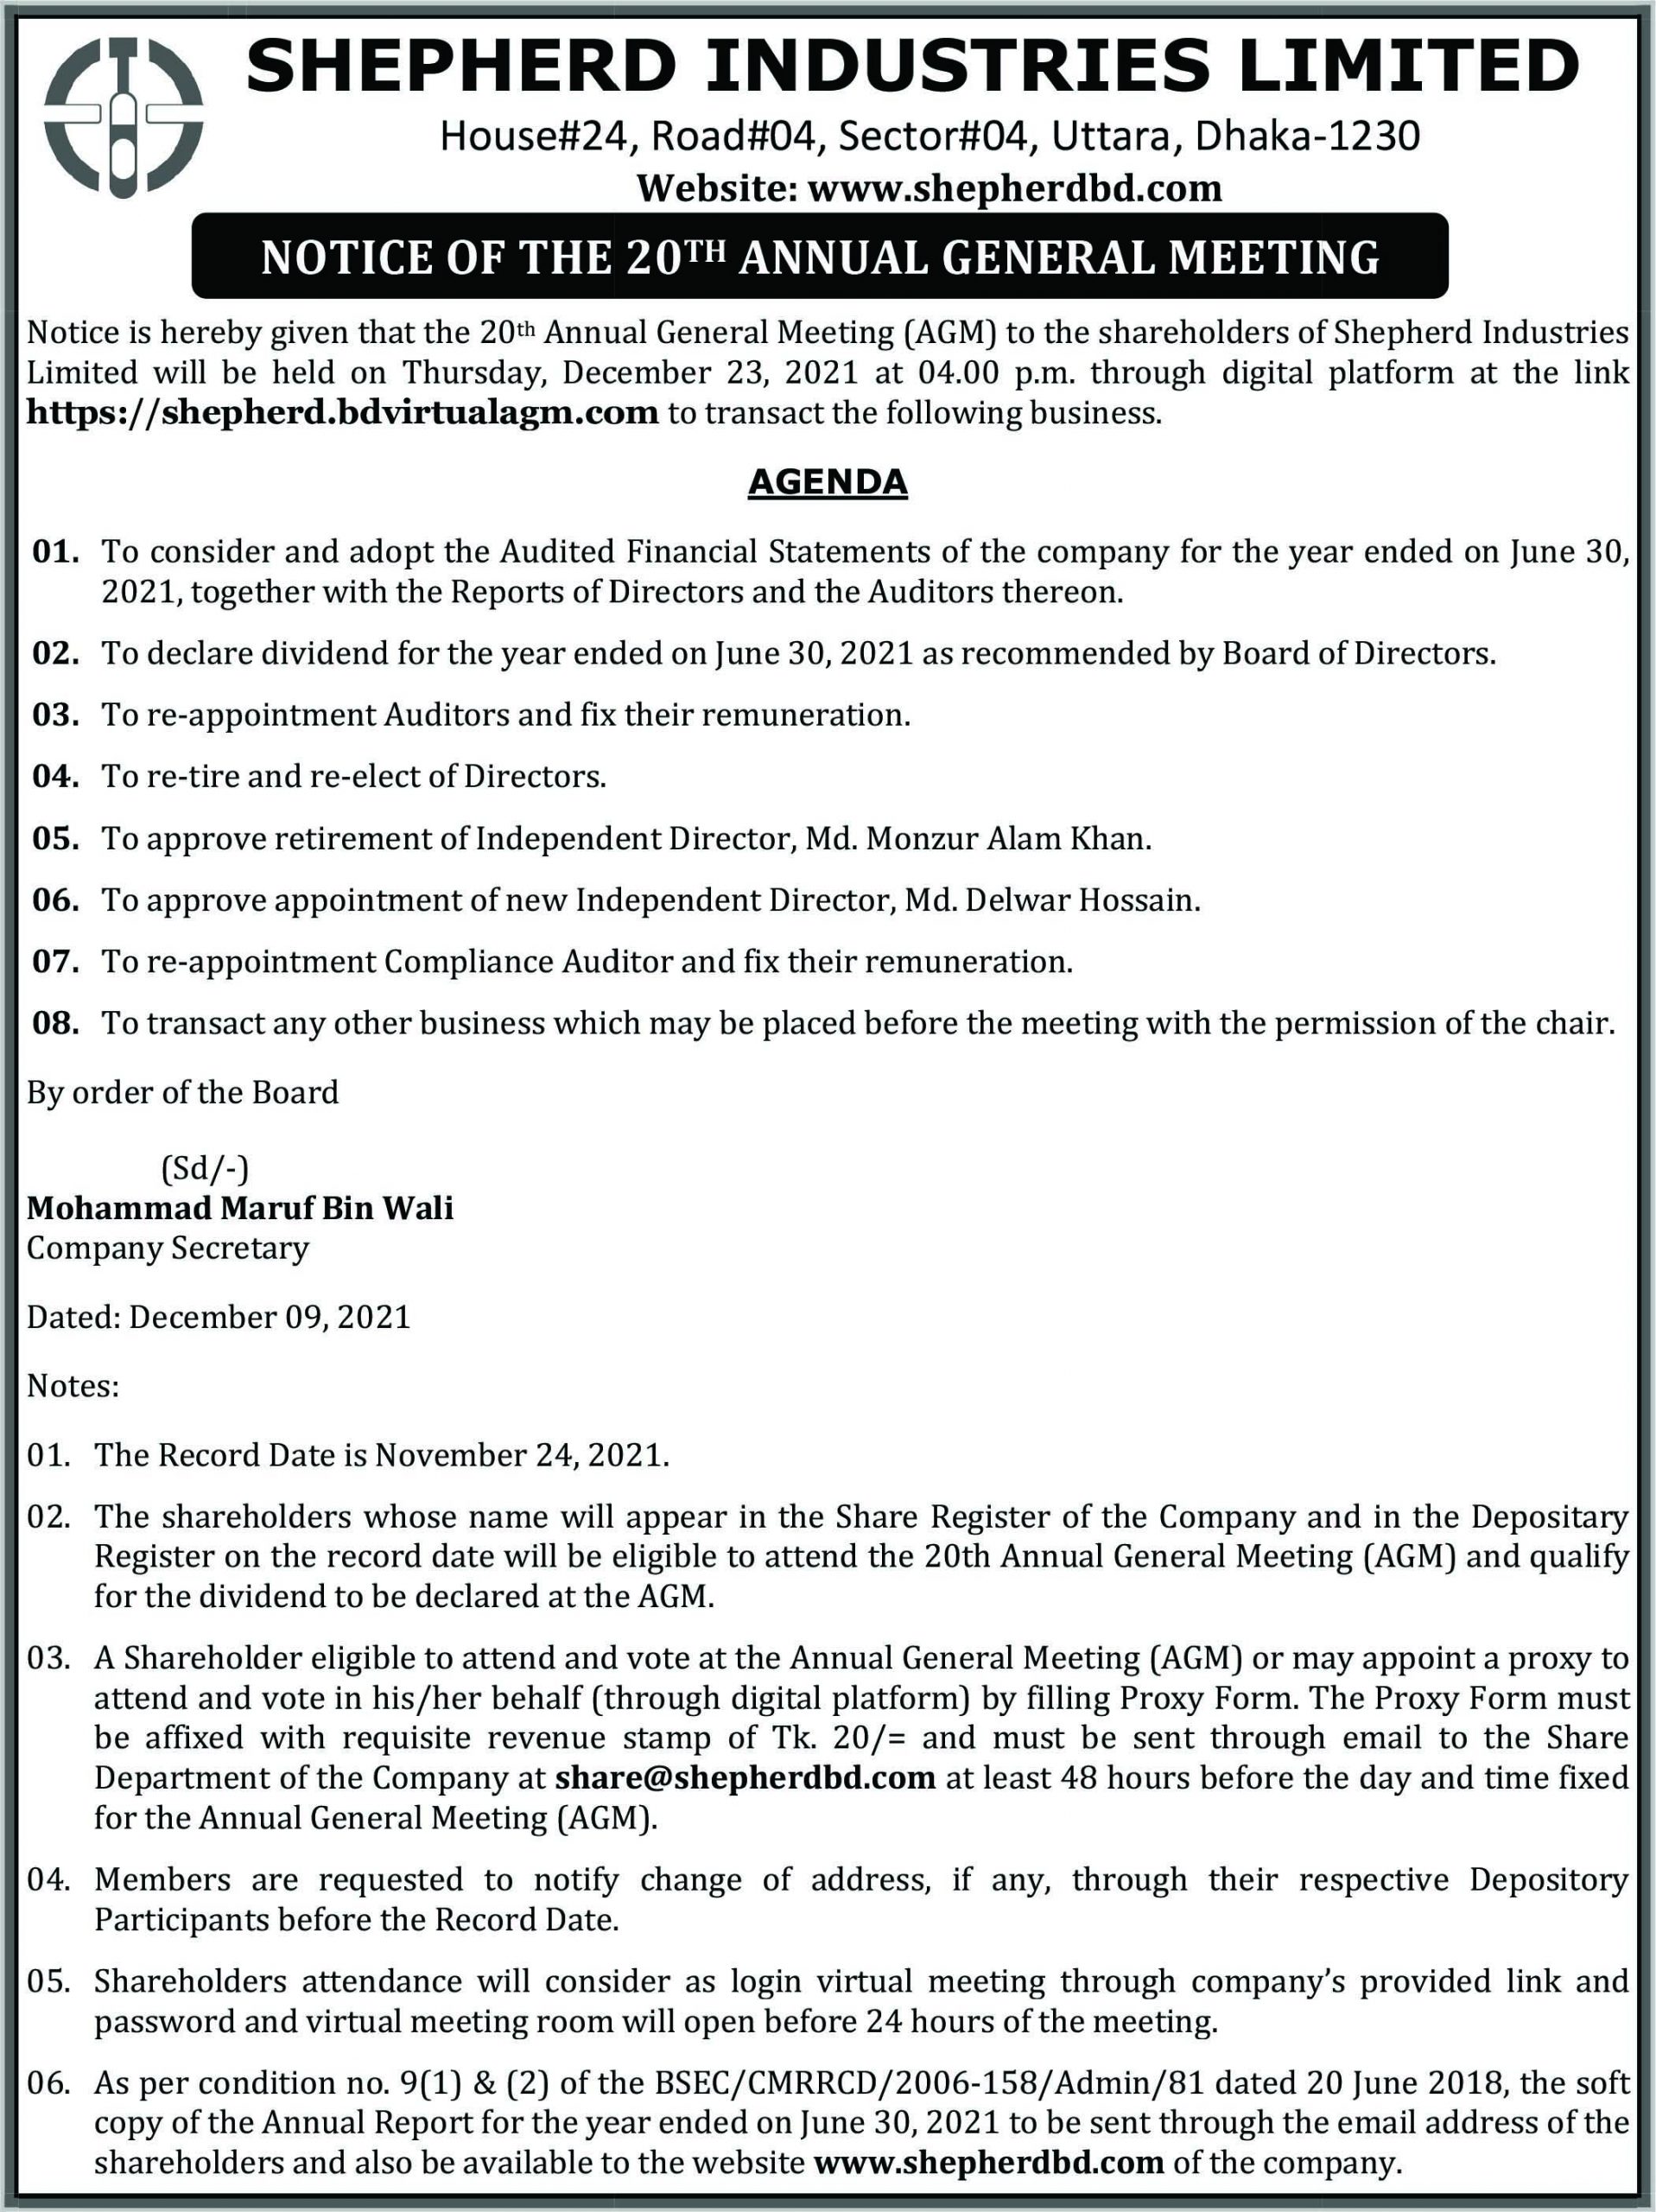 Notice of The 20th Annual General Meeting (AGM) on Shepherd Industries Limited